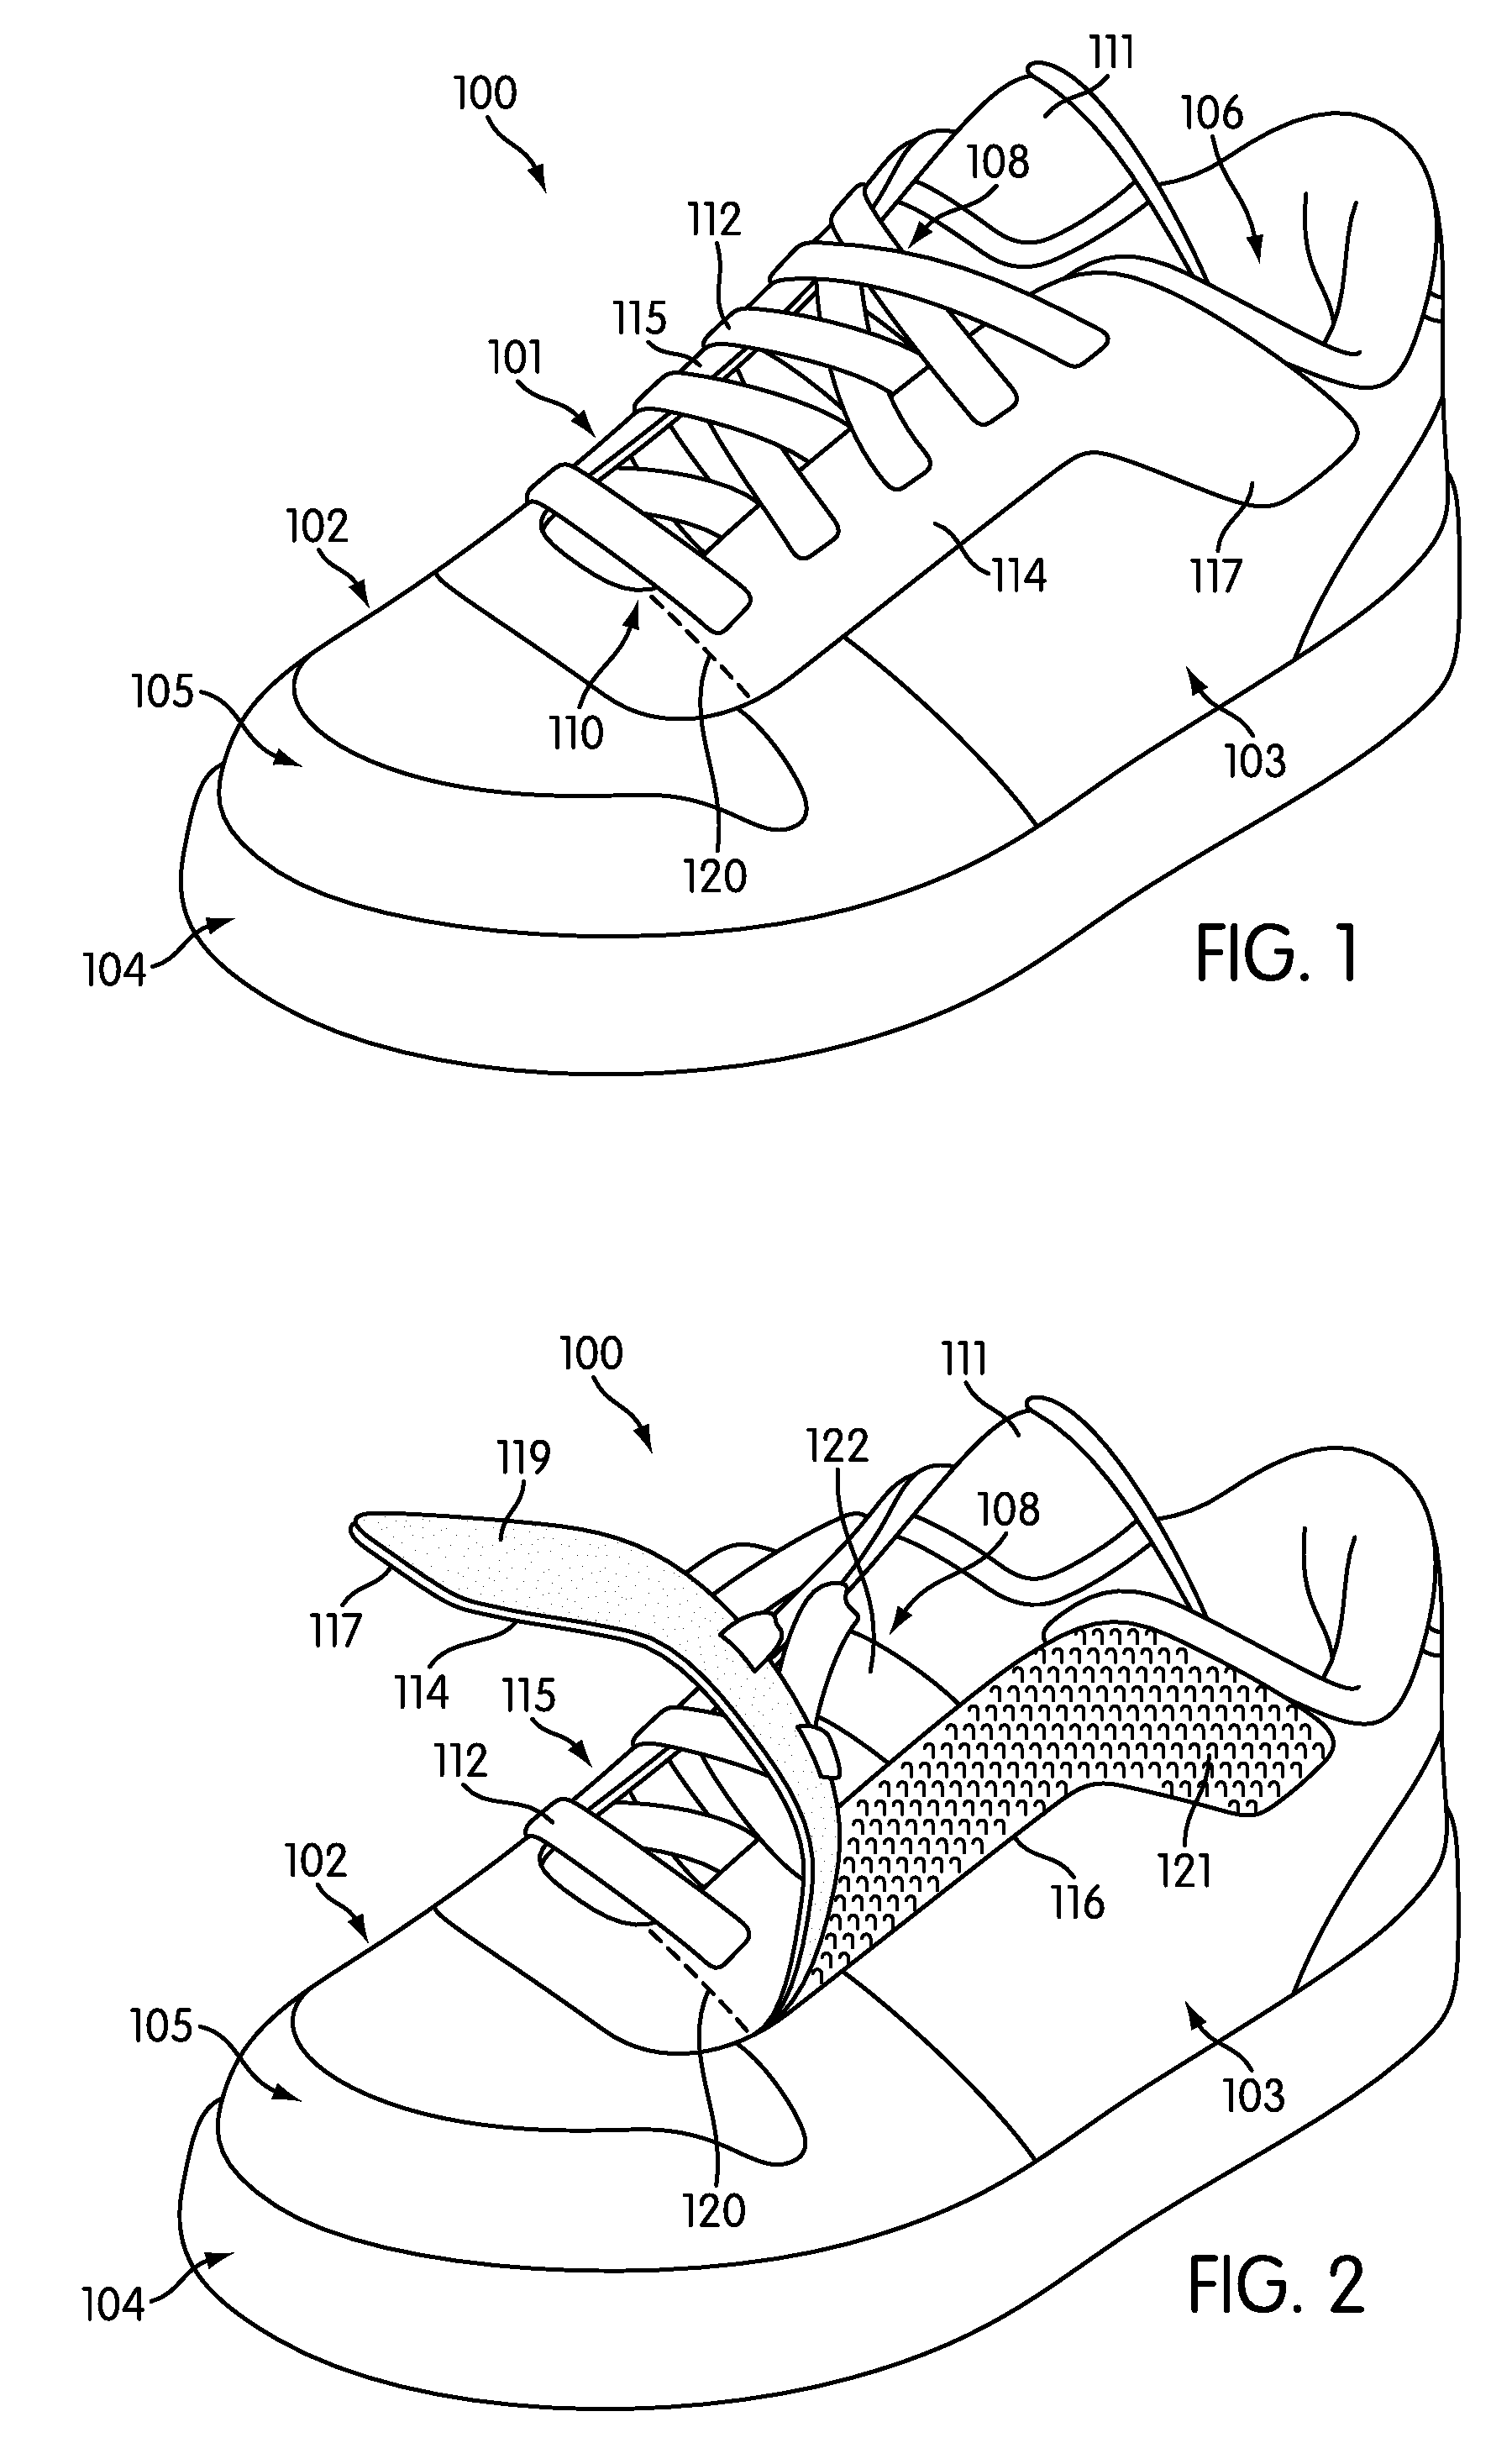 Article of footwear having removable eyelet portion